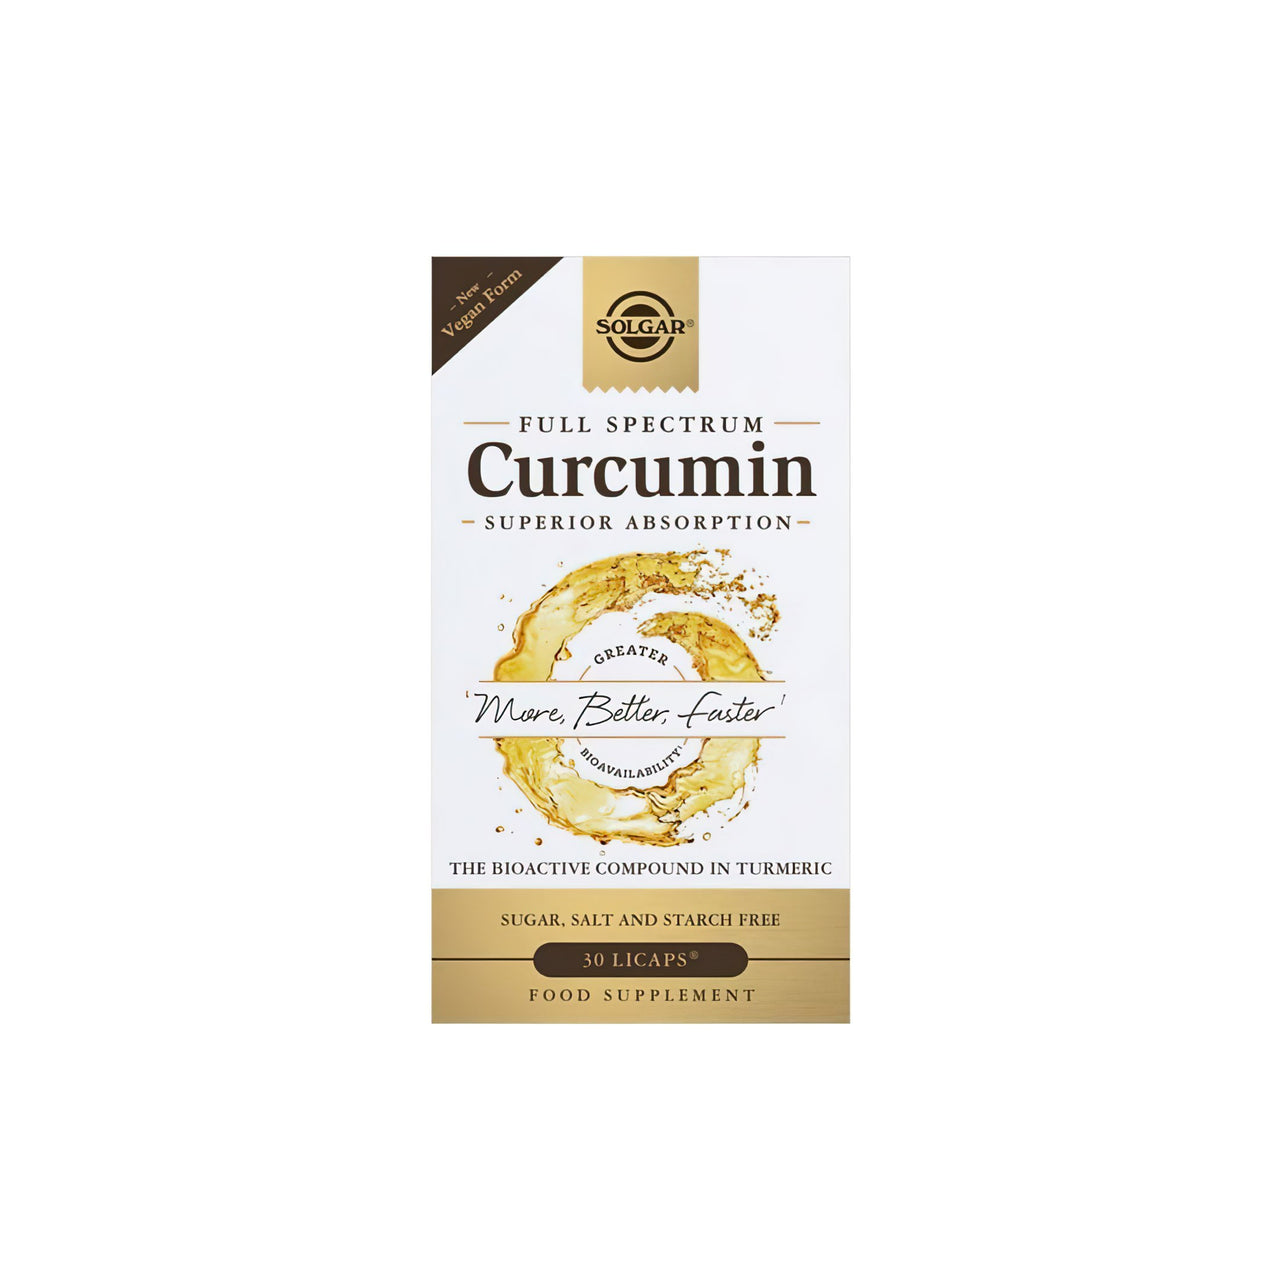 A box of Full Spectrum Curcumin 30 Liquid Extract Softgel with a gold label by Solgar.